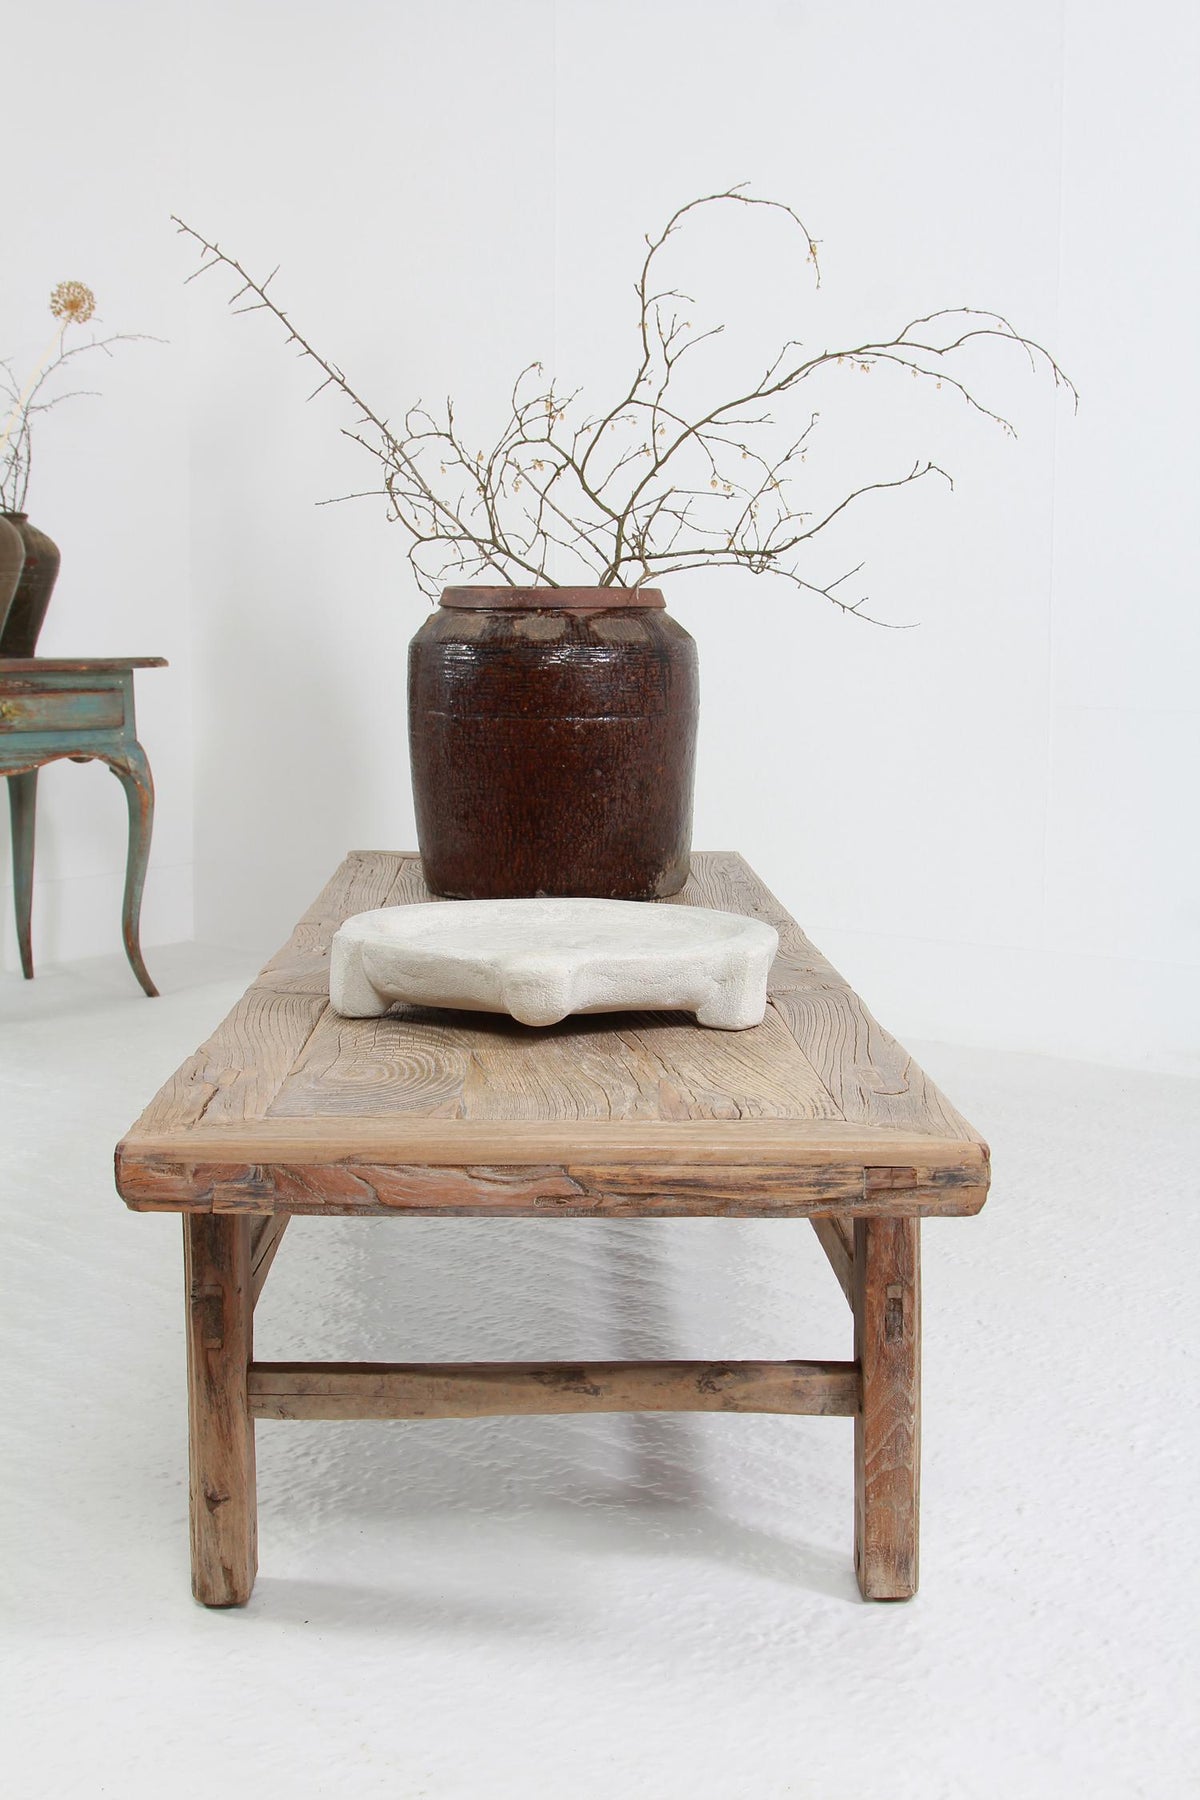 FABULOUS  XL ANTIQUE WEATHERED RUSTIC WOODEN COFFEE TABLE